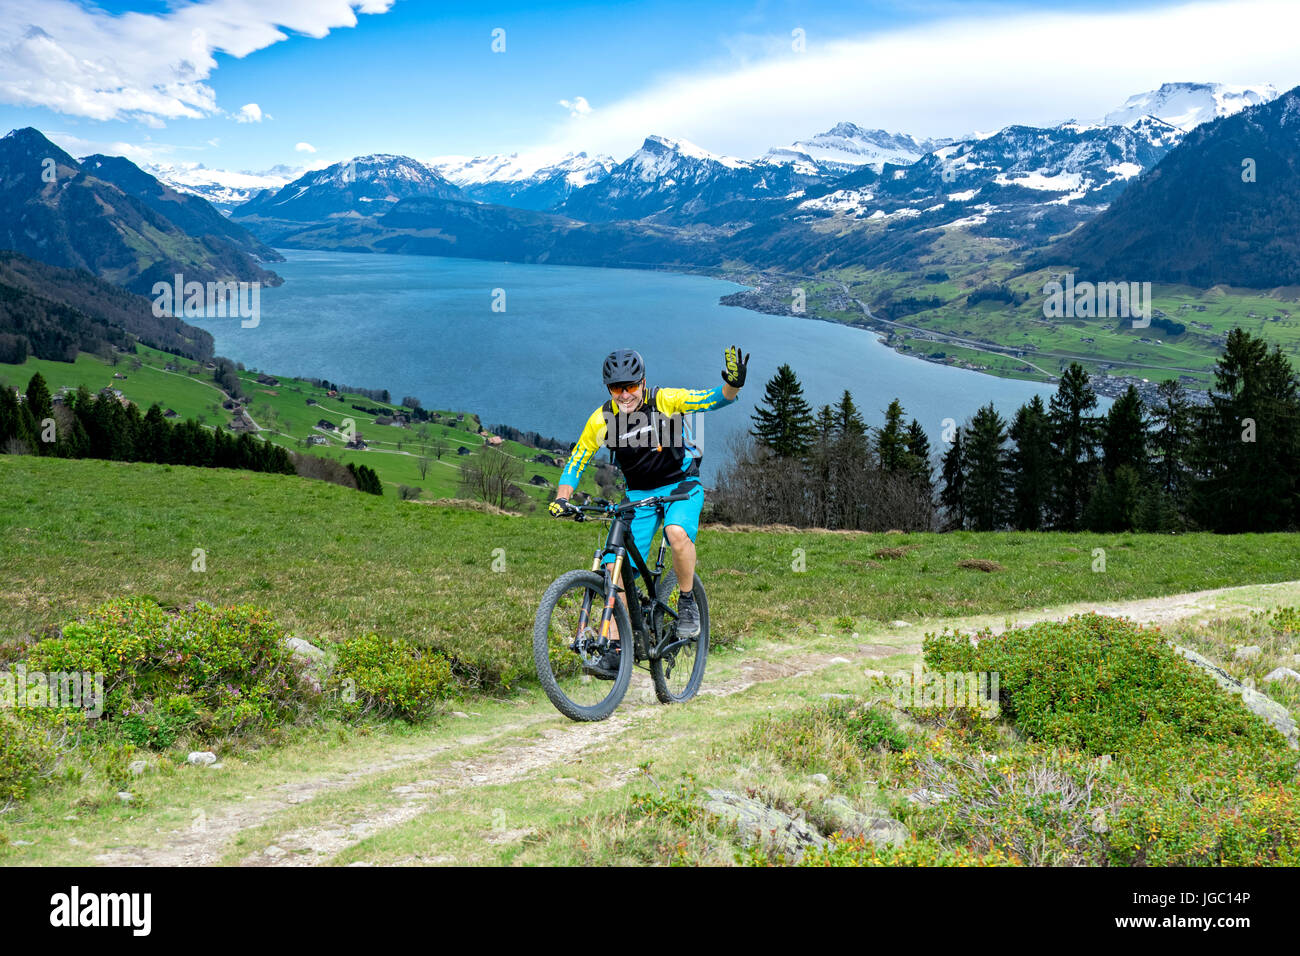 Sportive man in middle age with mountain bike on mountain trail beckons the viewer. The background shows the Lake Lucerne. Stock Photo